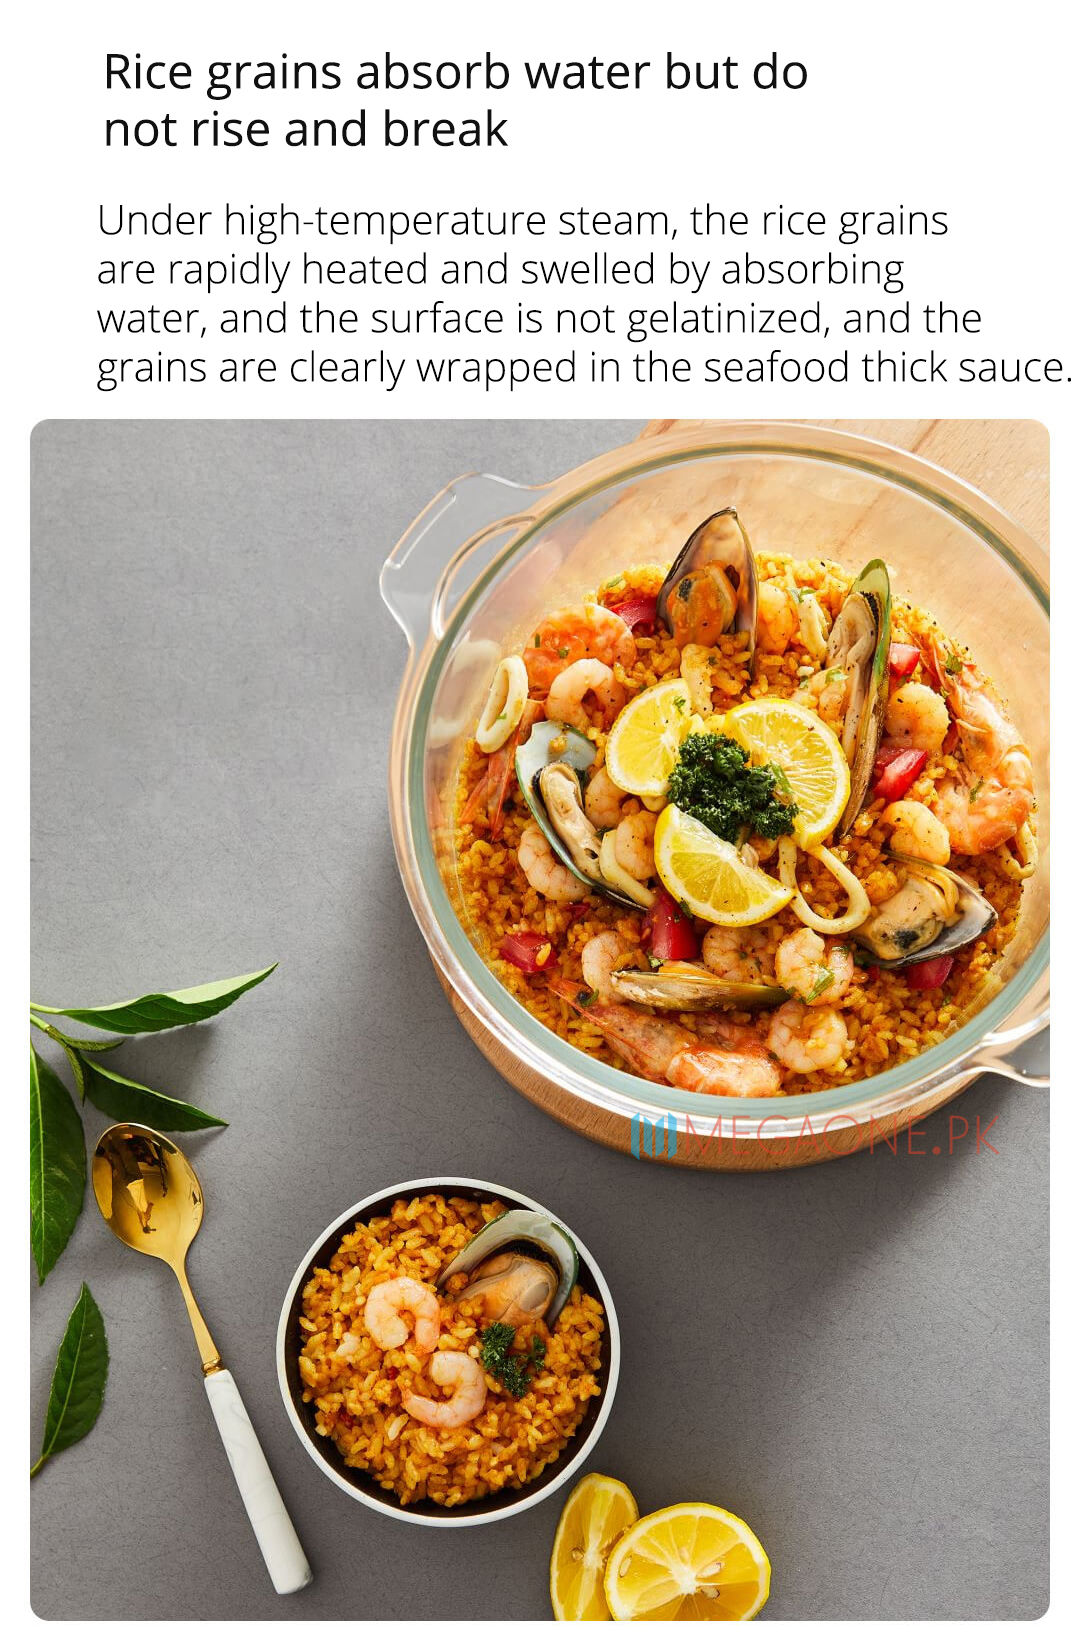 Under high-temperature steam, the rice grains are rapidly heated and swelled by absorbing water, and the surface is not gelatinized, and the grains are clearly wrapped in the seafood thick sauce.